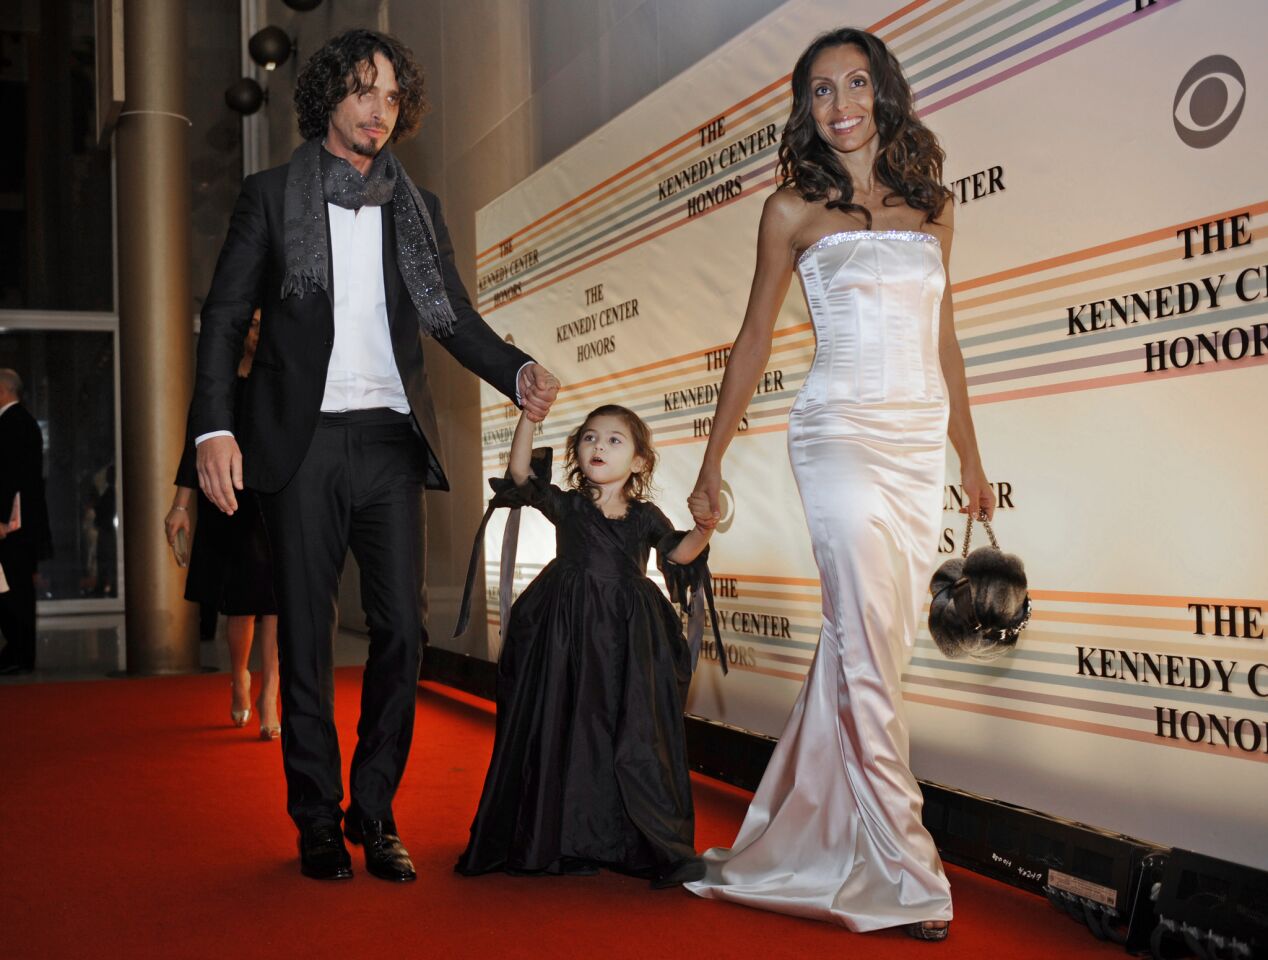 Chris Cornell arrives with his daughter Toni and wife, Vicky Karayiannis, for the Kennedy Center Honors in Washington, D.C., on Dec. 7, 2008.